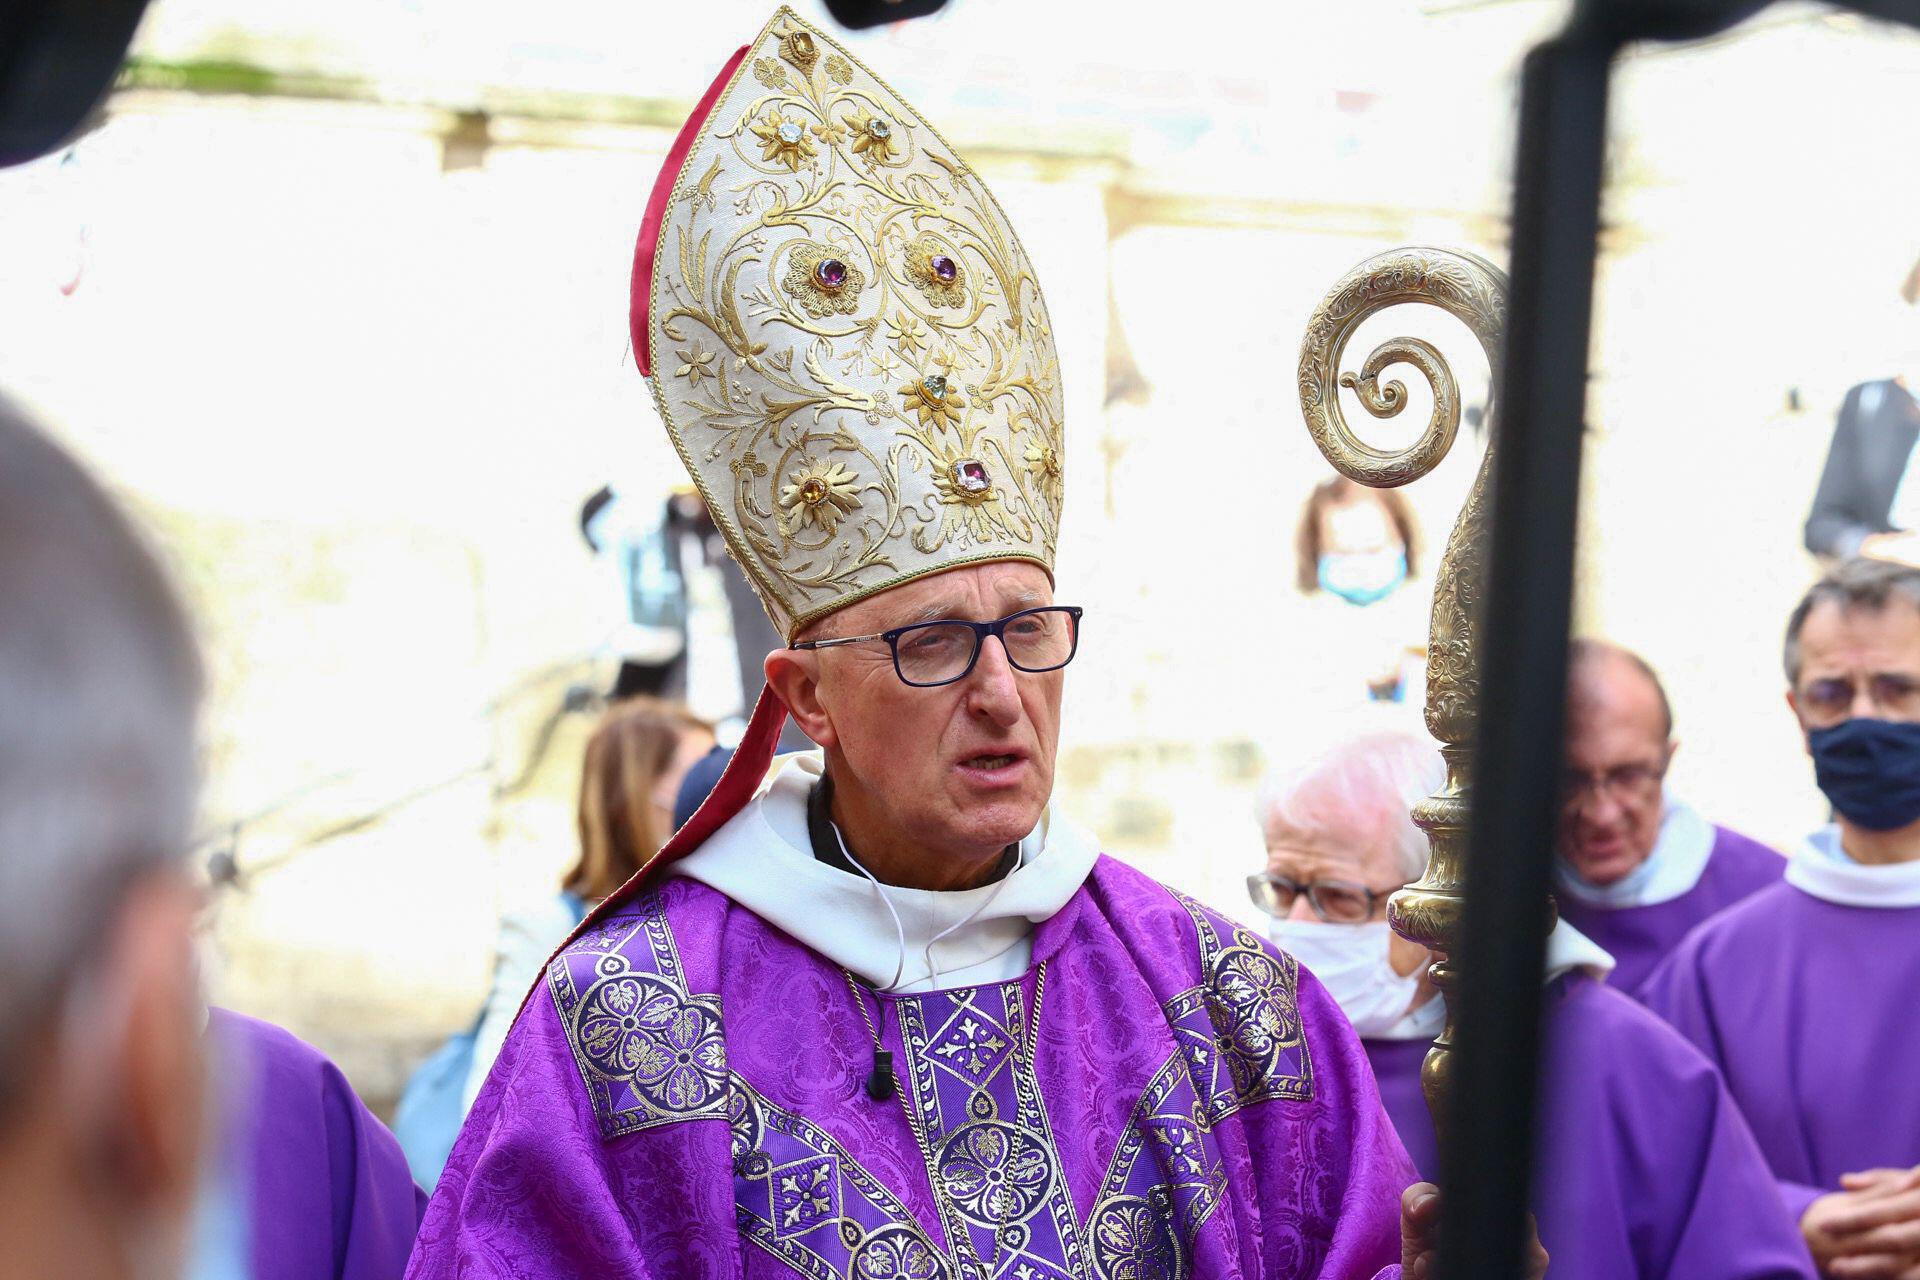 Troubled Toulon diocese gets coadjutor to smooth bishop’s retirement